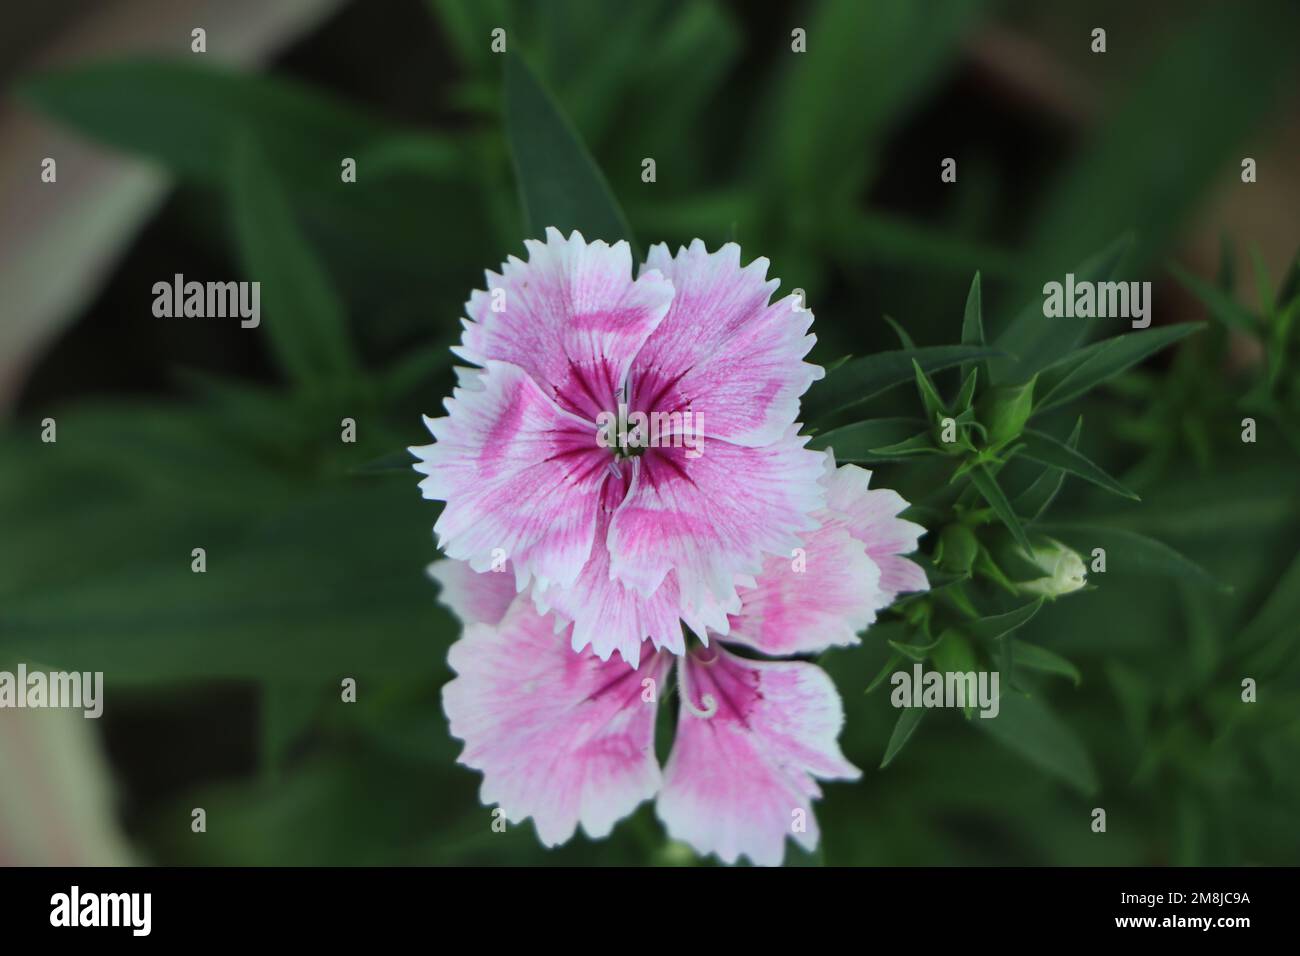 Closeup of pink or cheddar pink dianthus flower Stock Photo